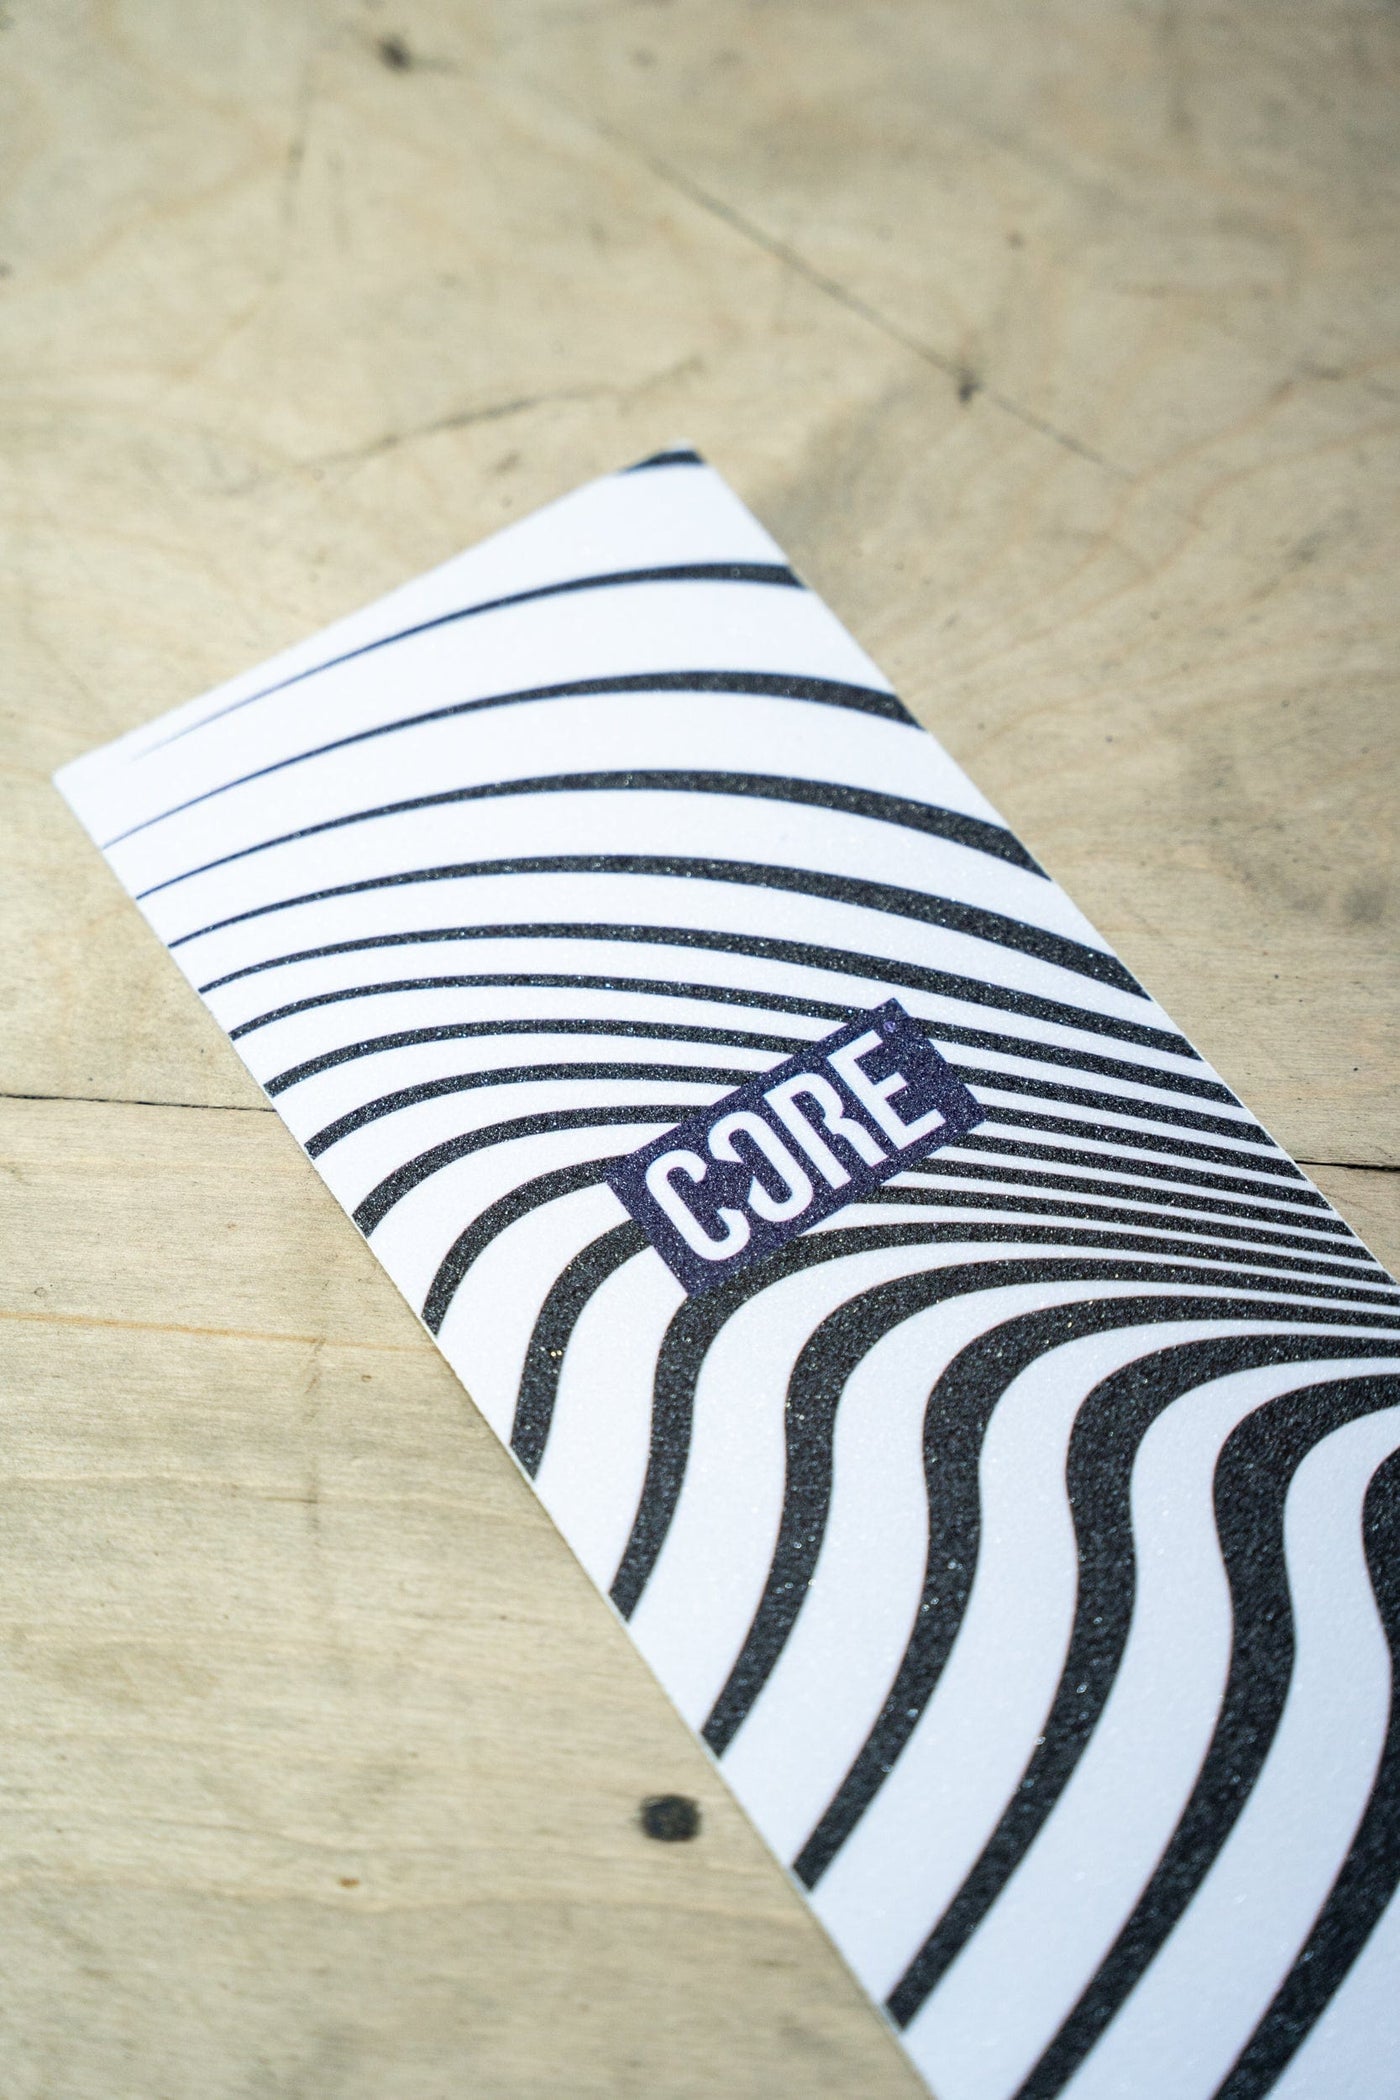 CORE Scooter Grip Tape Vibe White I Grip Tape Scooter Top